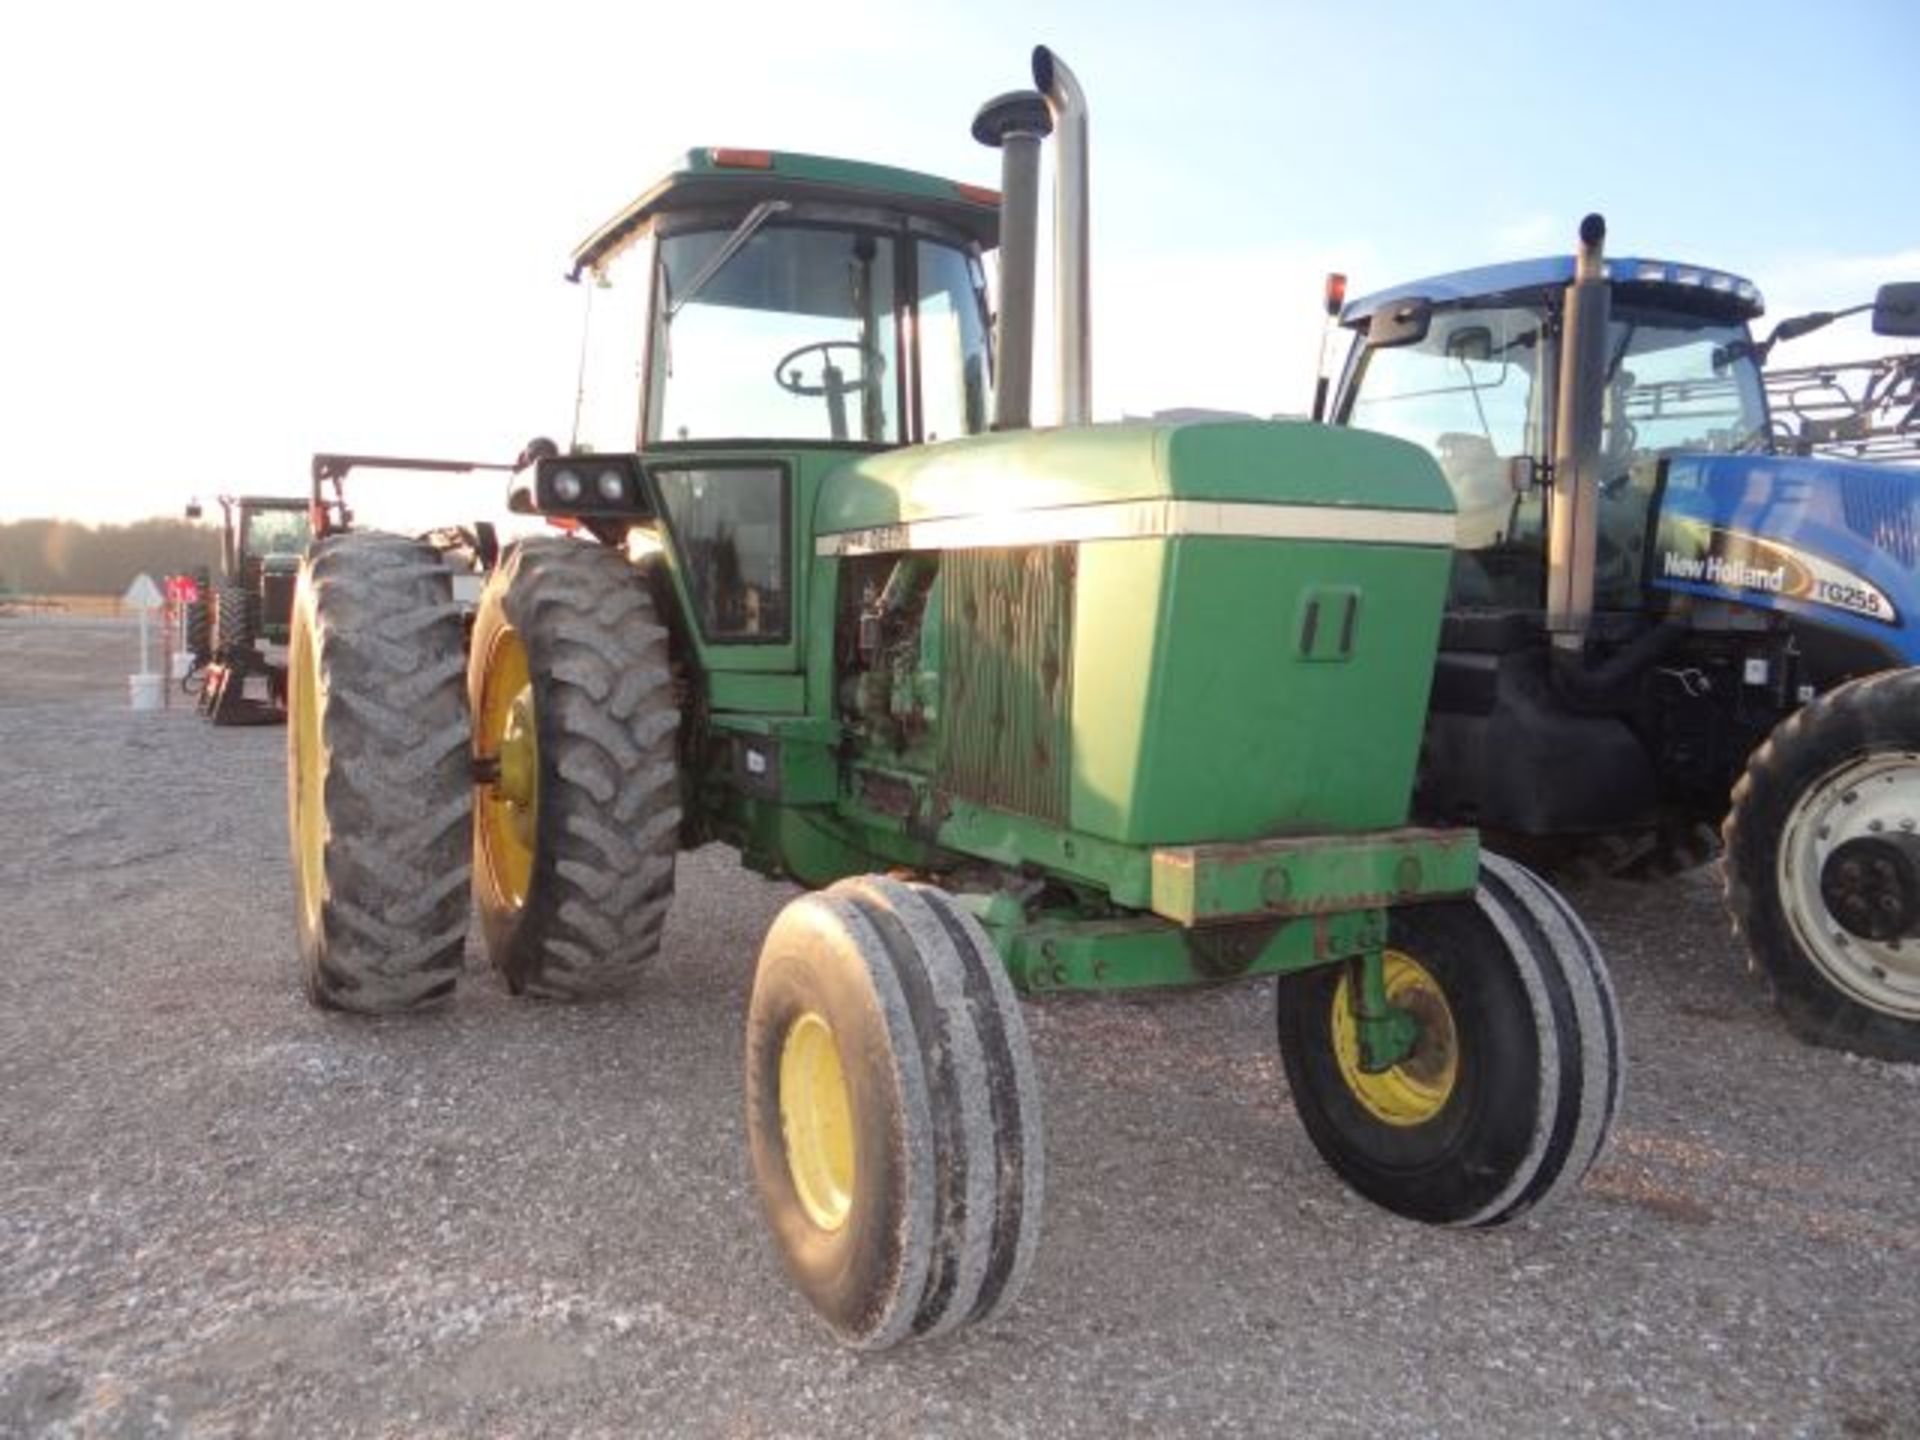 1981 JD 4640 Tractor 9330 hrs, 160-180hp, 3pt Hitch, 3 SCV, sn# 4640H023975RW - Image 2 of 5